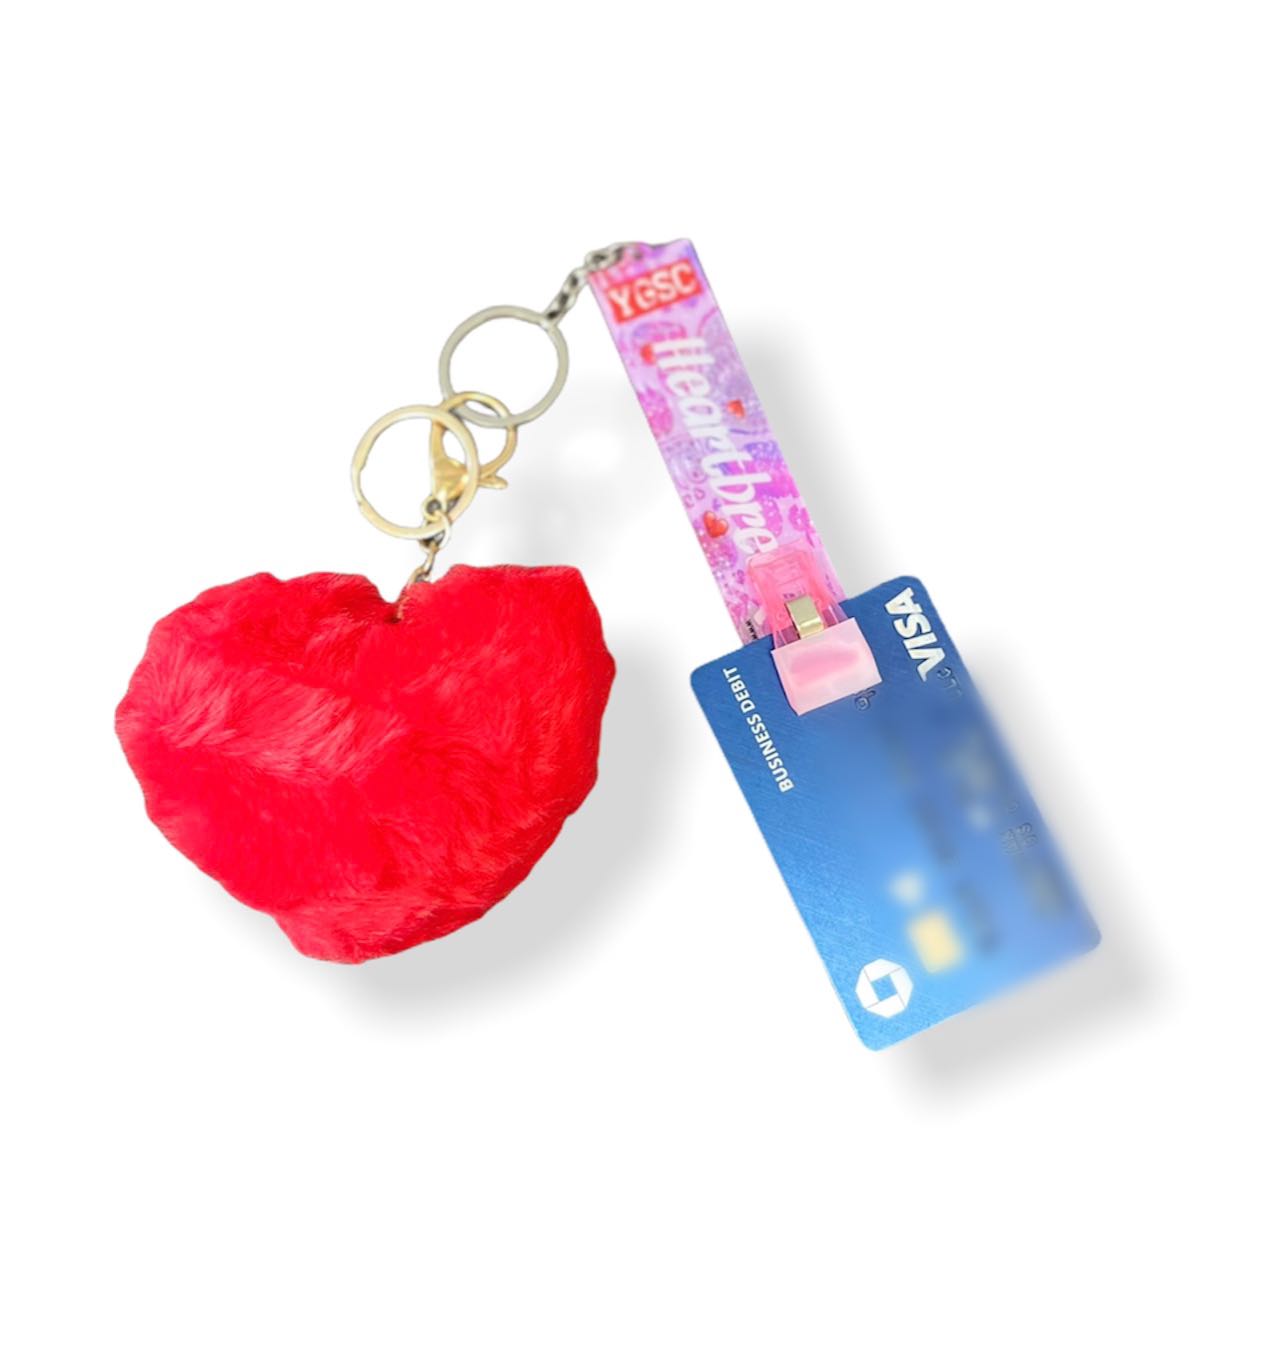 Ladies card grabber for ATM machine with heart puff